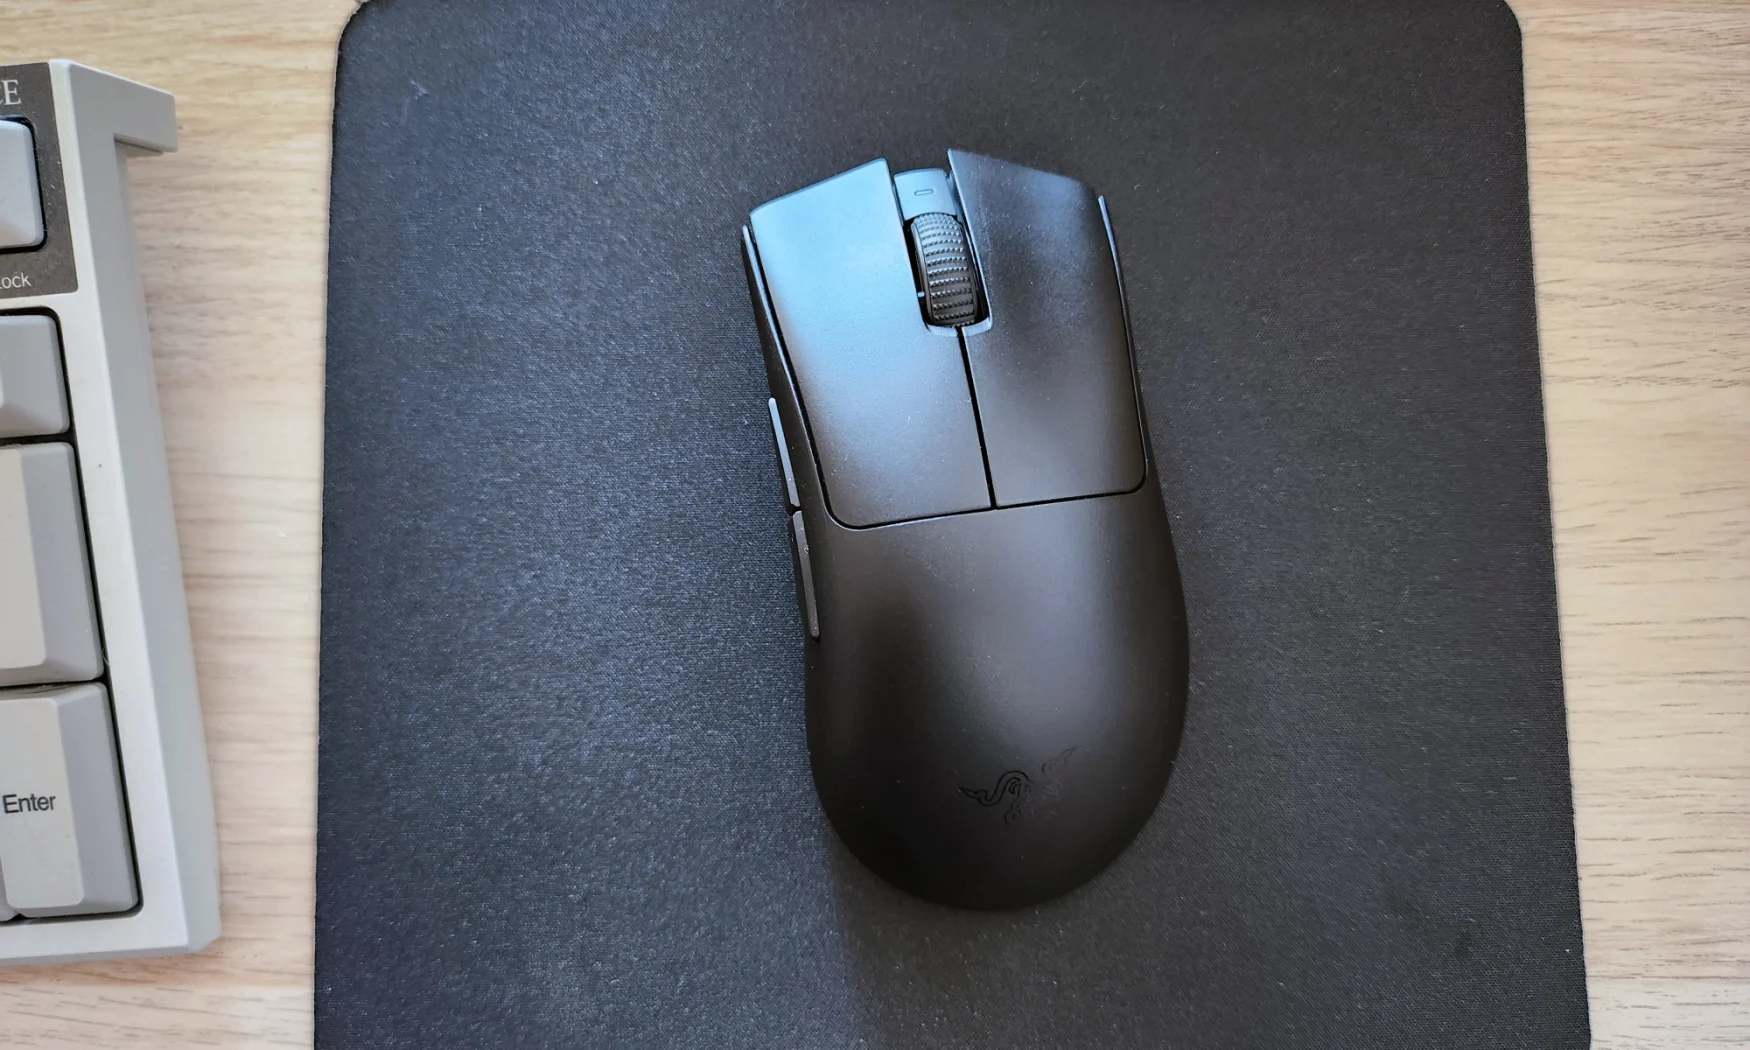 The Razer DeathAdder V3 Pro gaming mouse rested atop a black mouse pad on a desk.